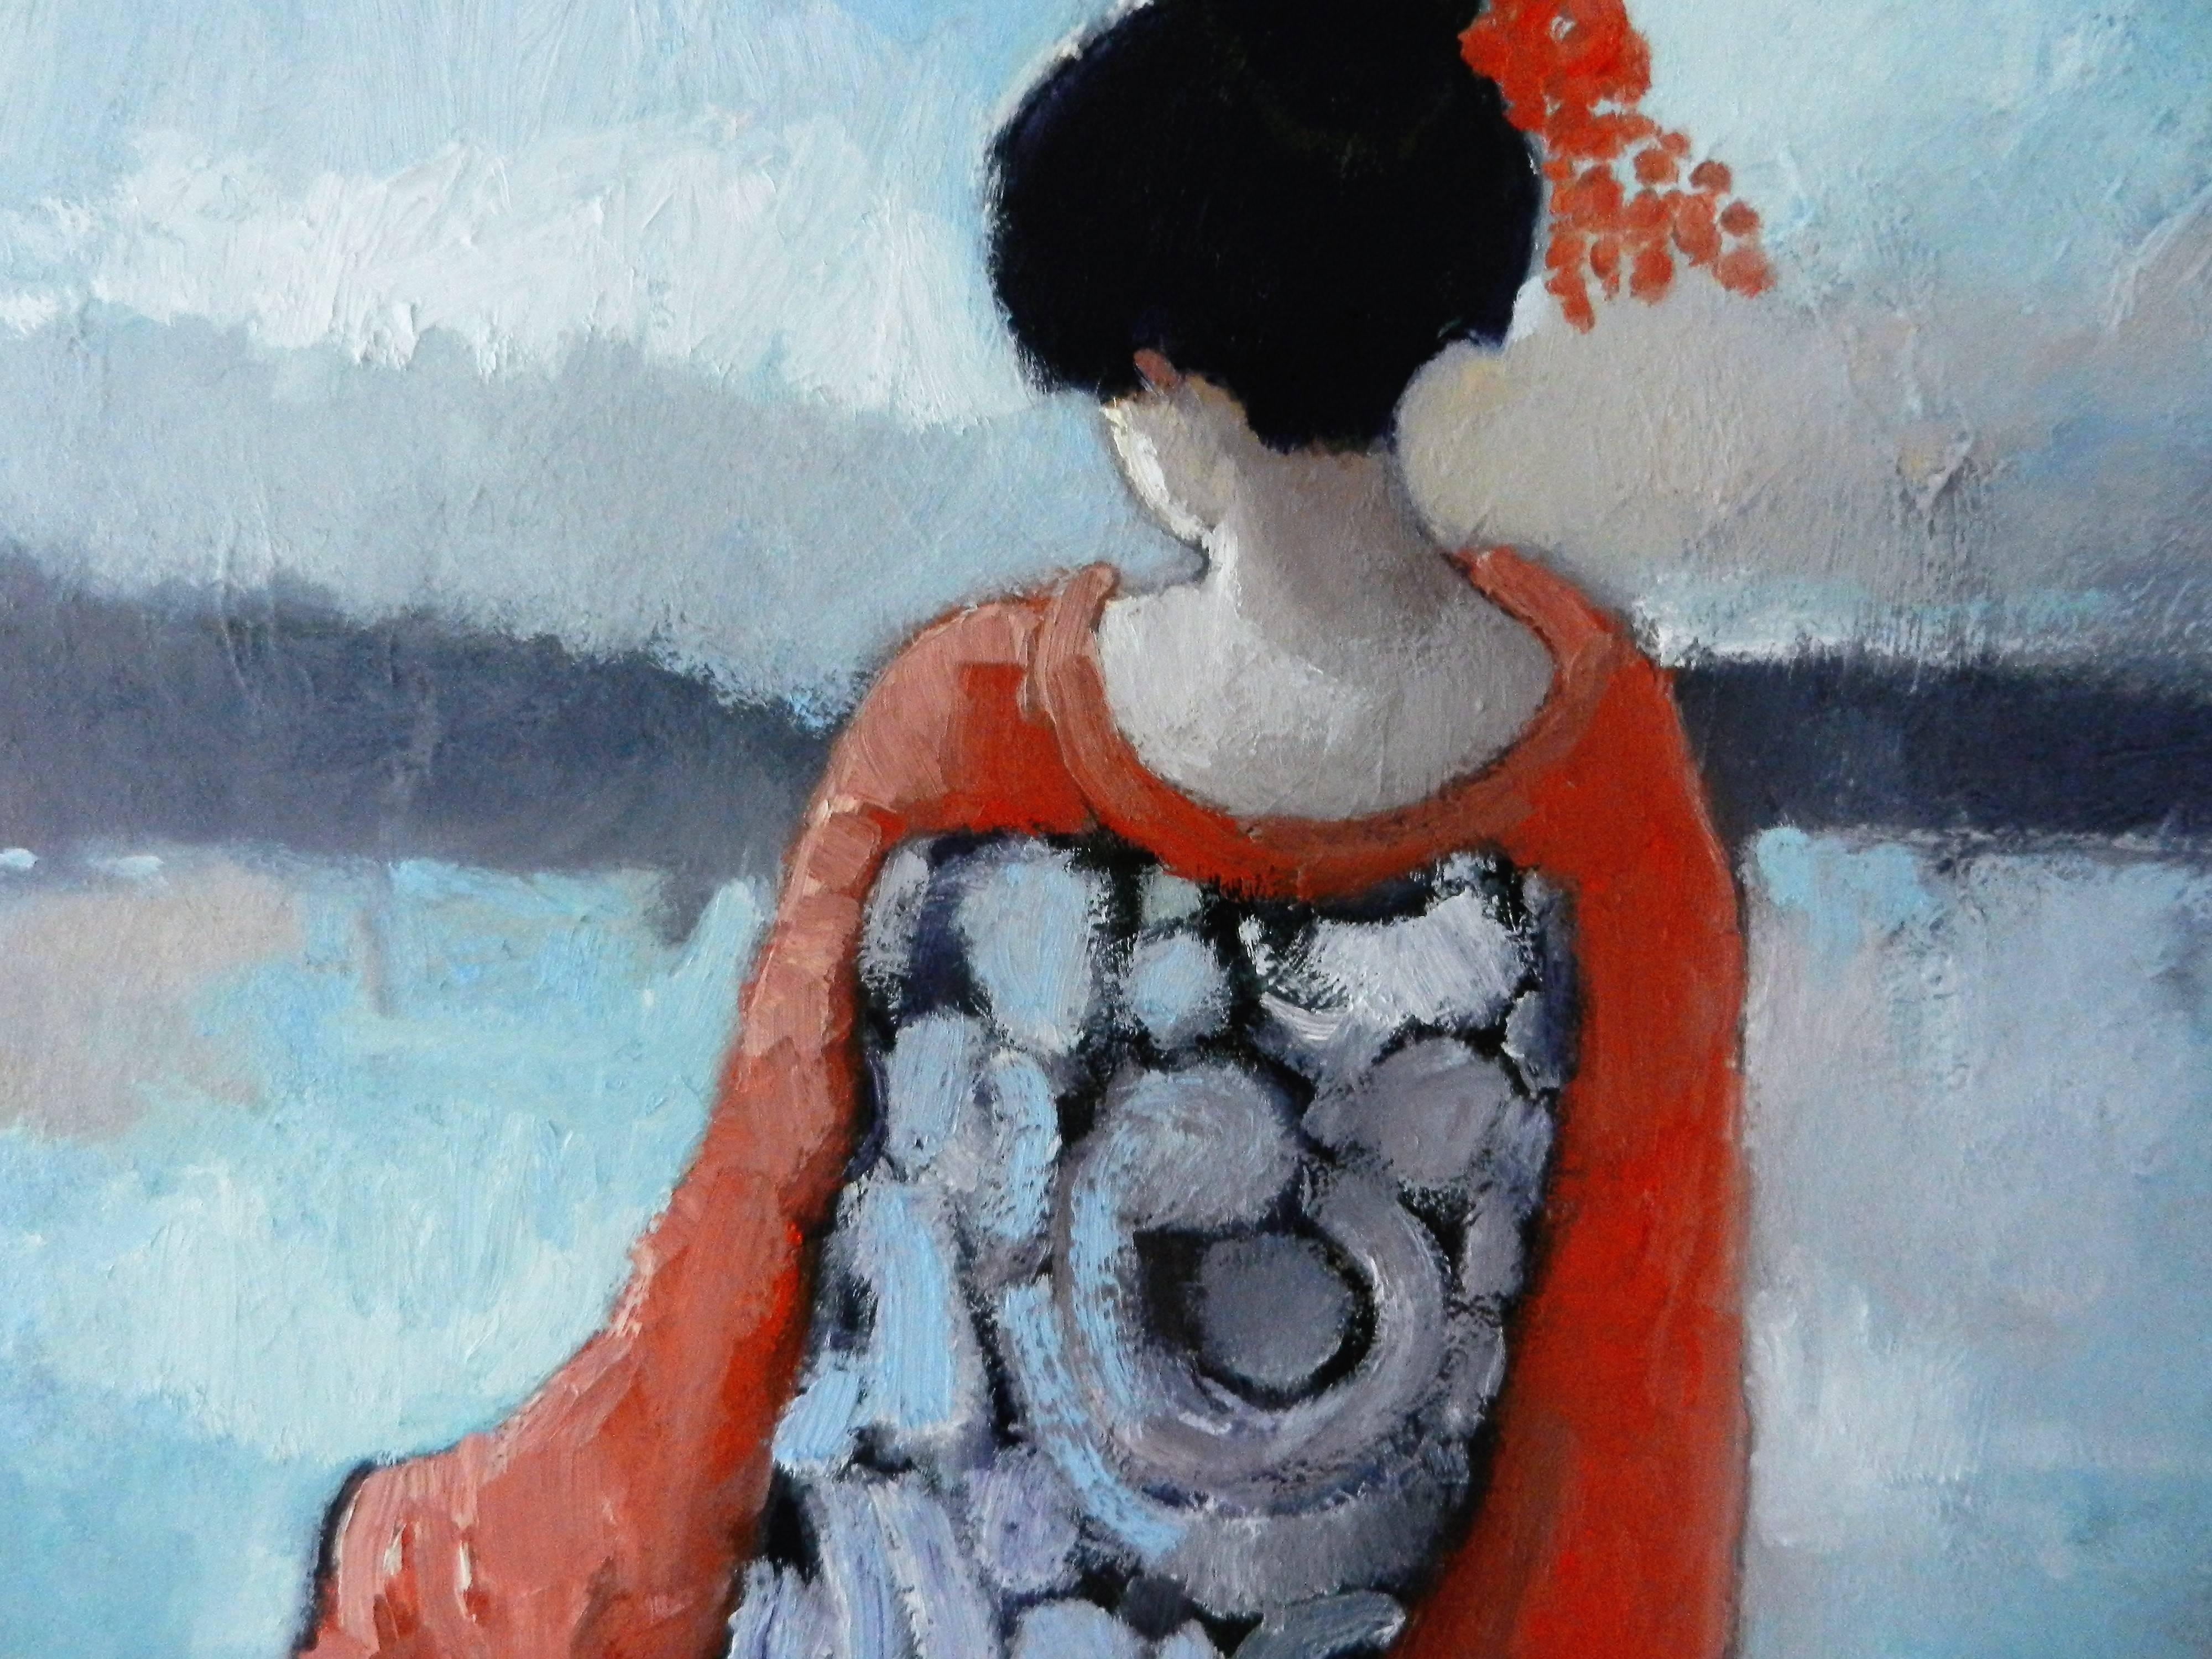 Patterned Obi
Mary Pratt
Oil painting on stretched canvas
One-of-a-kind
Signed on front 2017
60 in. h x 48 in. w x 1.5 in. d 15 lbs. 0 oz.

Artist Comments

Last week I spent time at the beach and the marsh. This geisha was on my mind; I combined